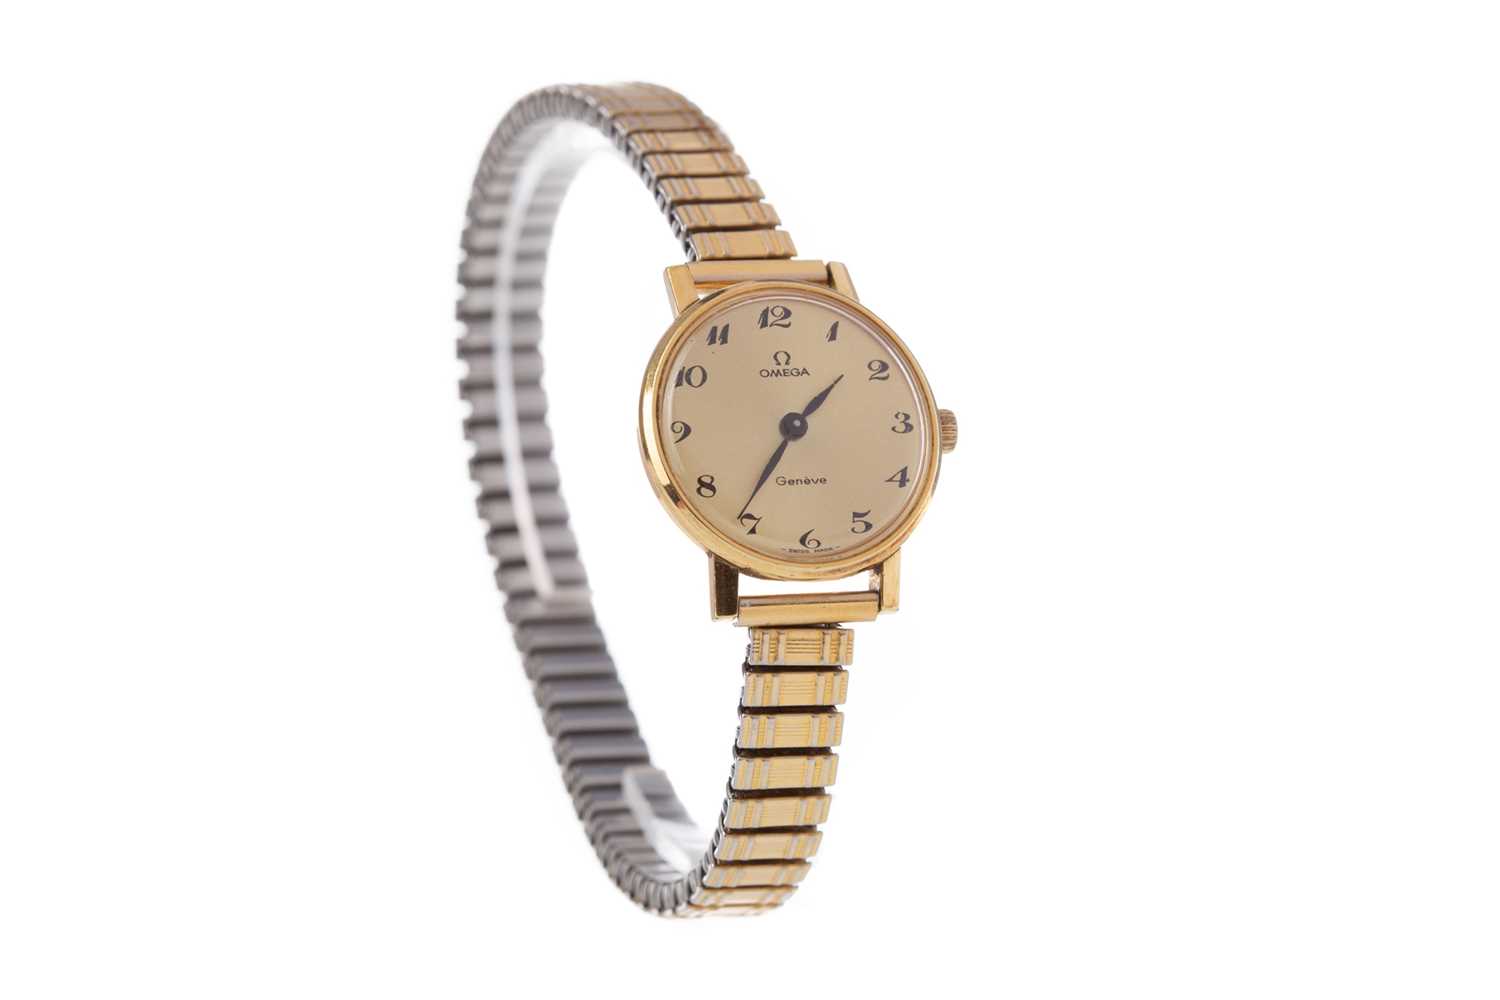 Lot 707 - A LADY'S OMEGA GOLD PLATED MANUAL WIND WRIST WATCH